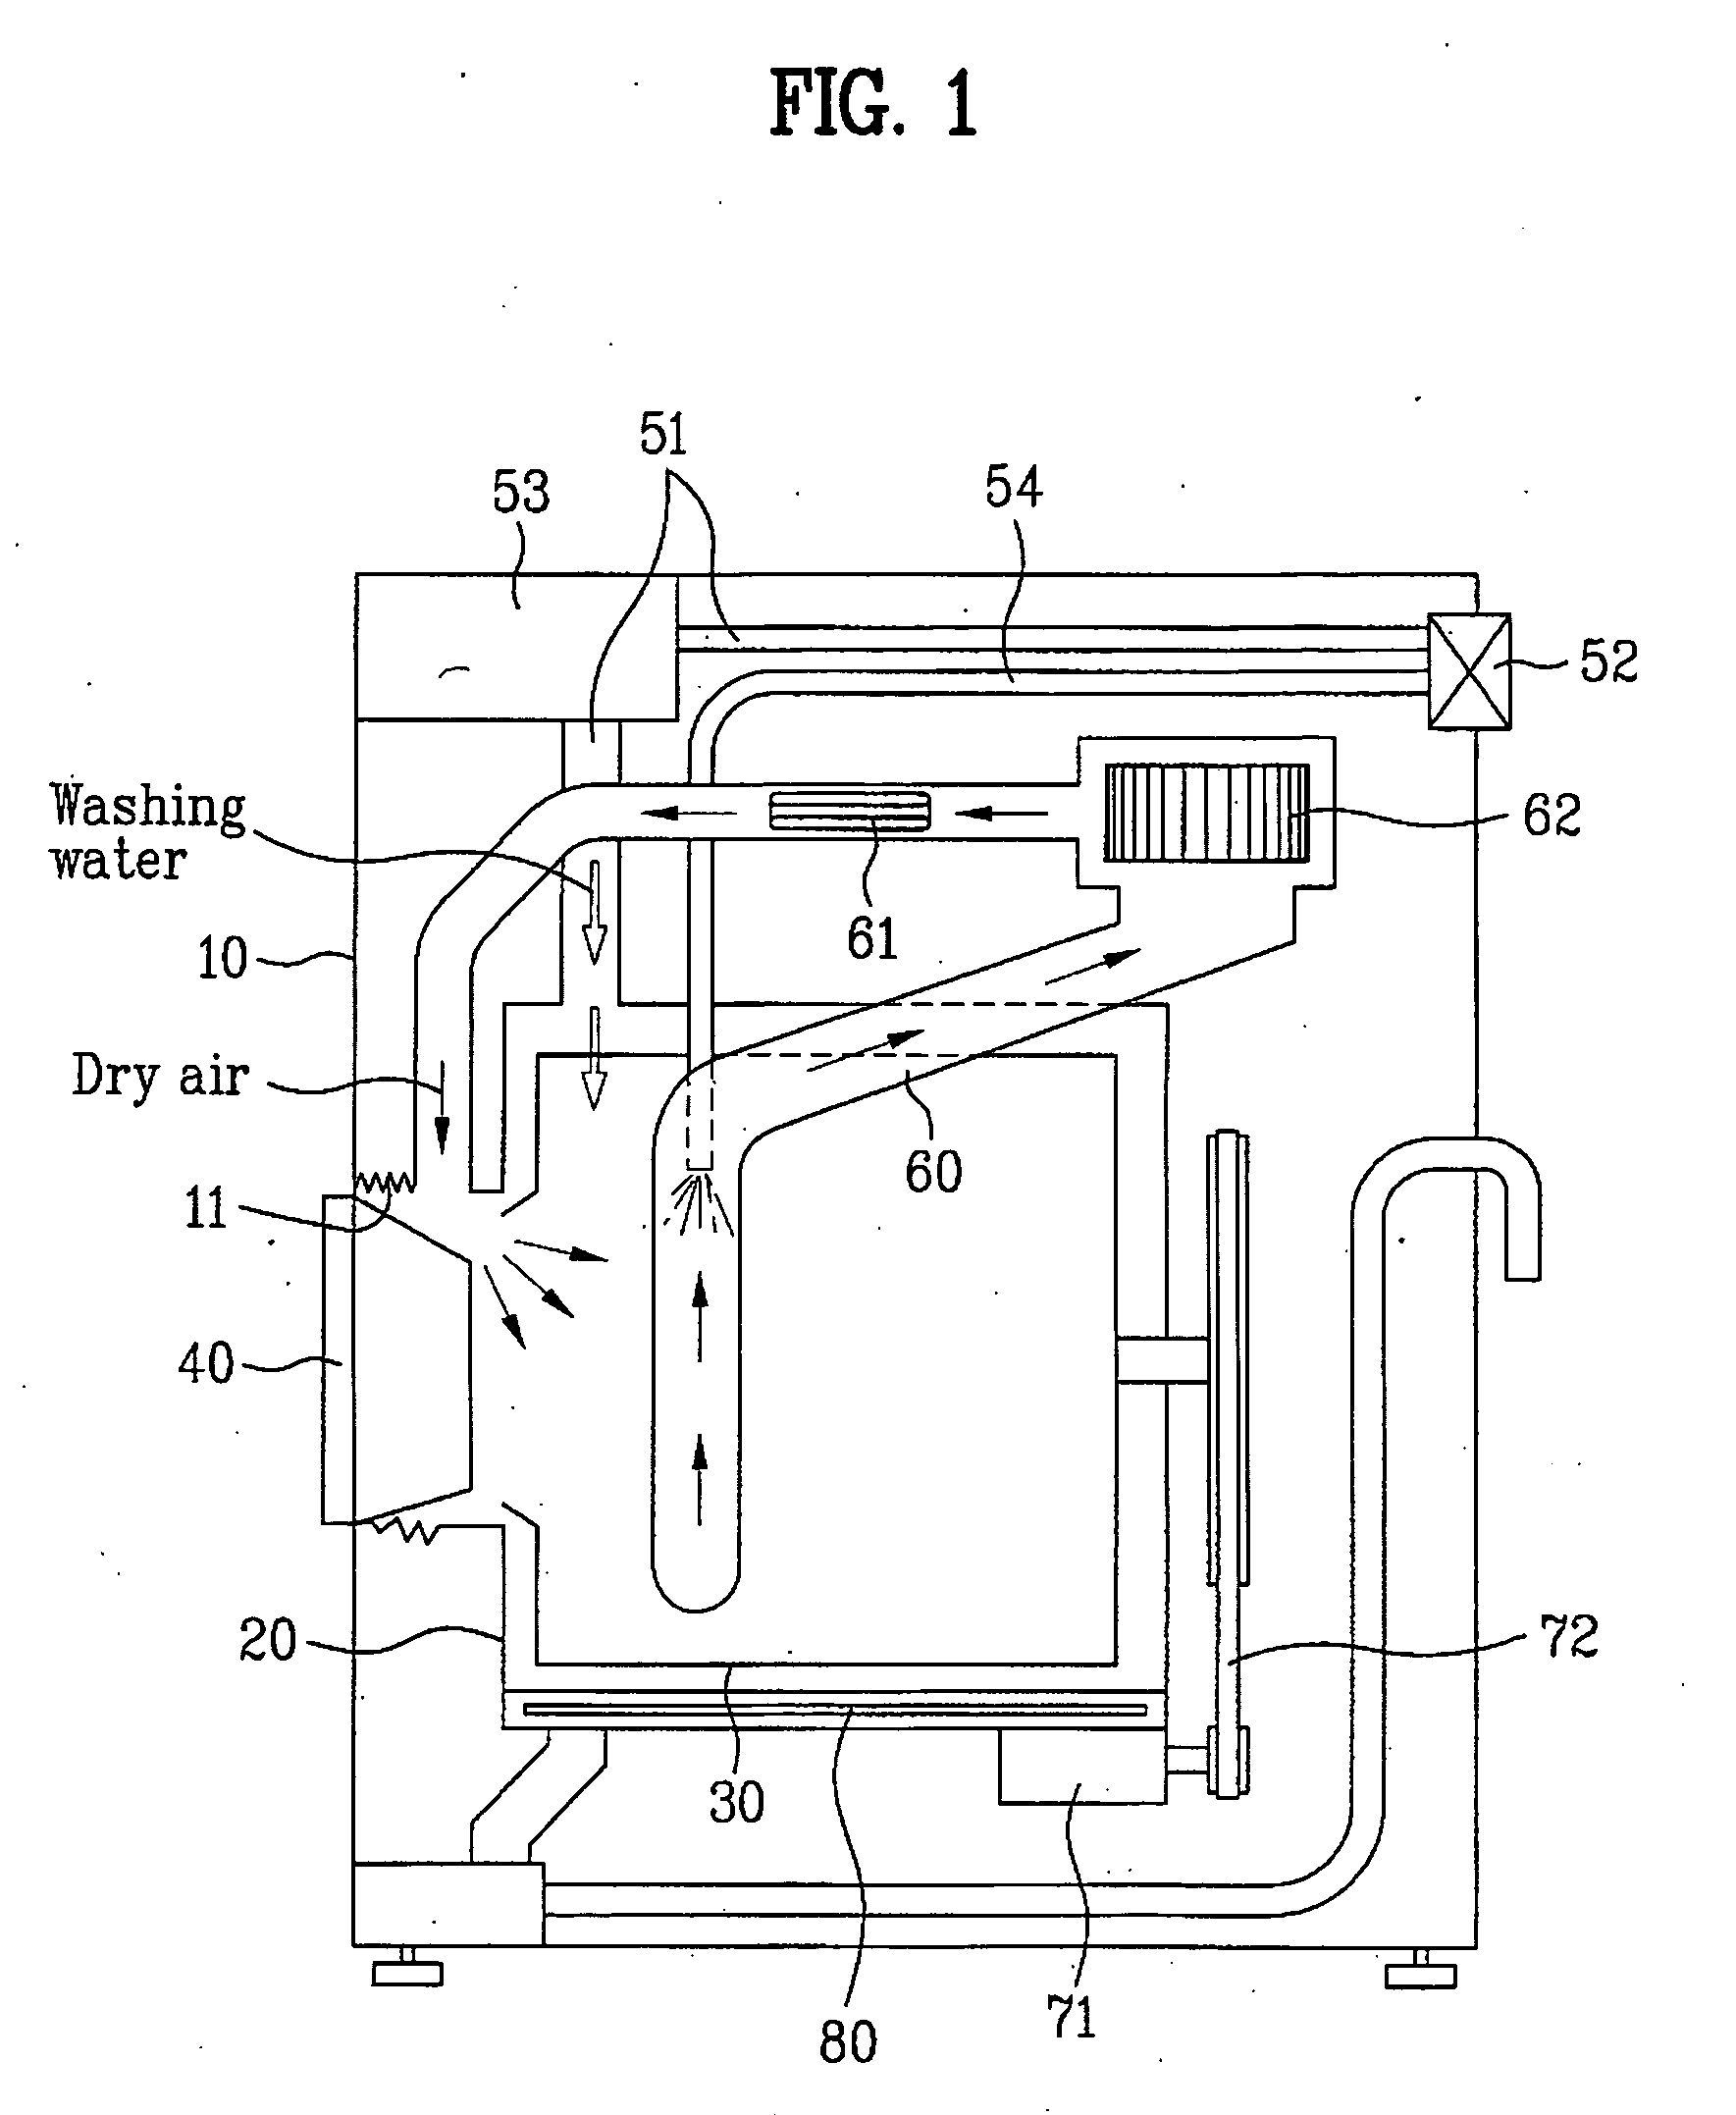 Structure for supplying hot air for drying clothes in drum type washing machine and operation control method thereof